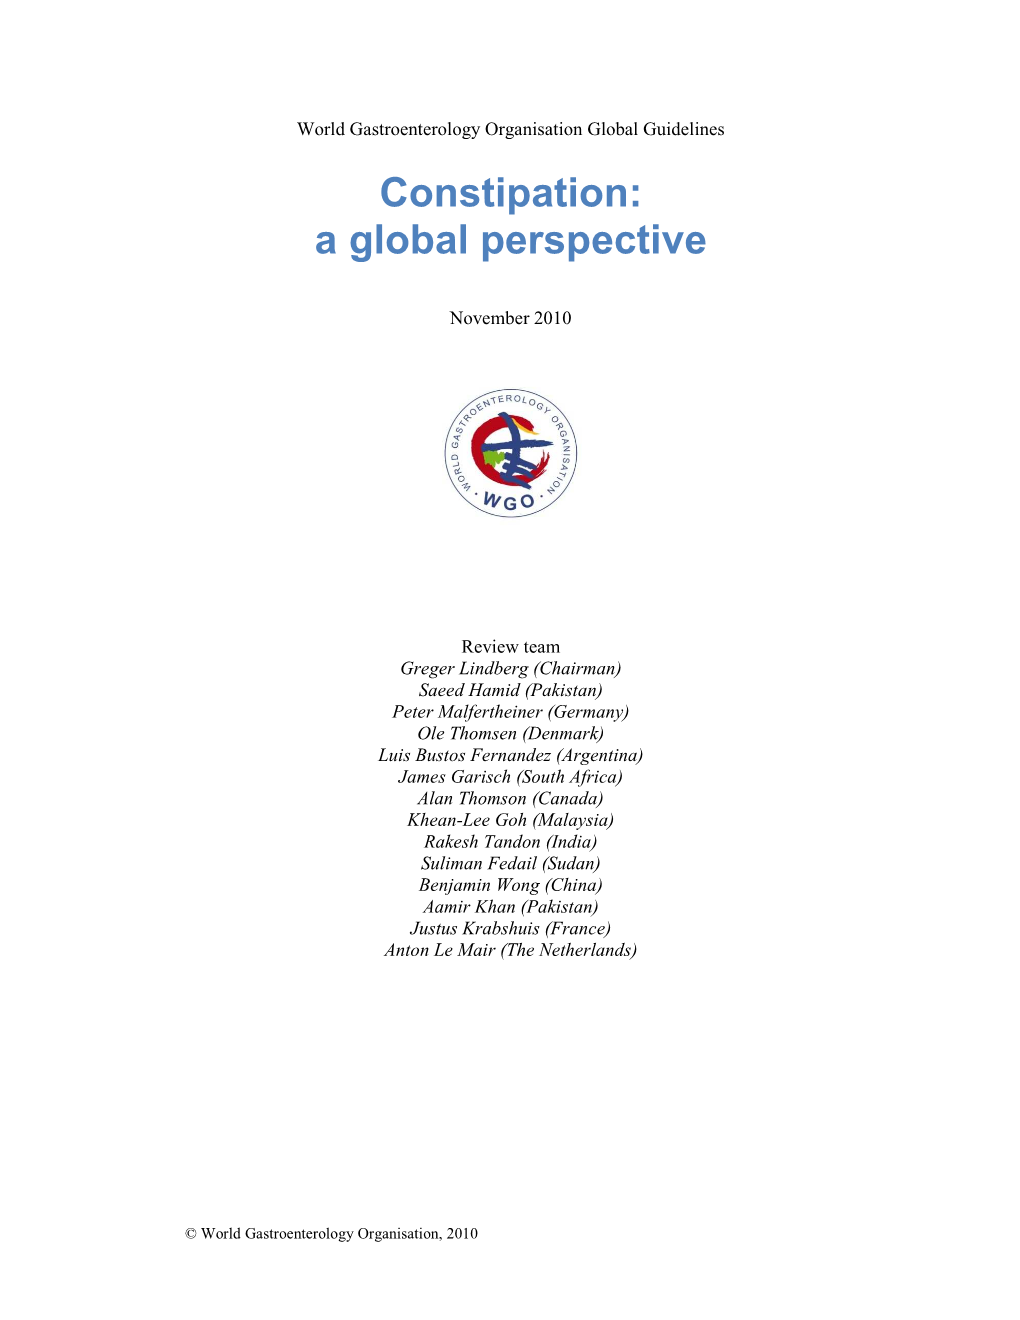 Constipation: a Global Perspective